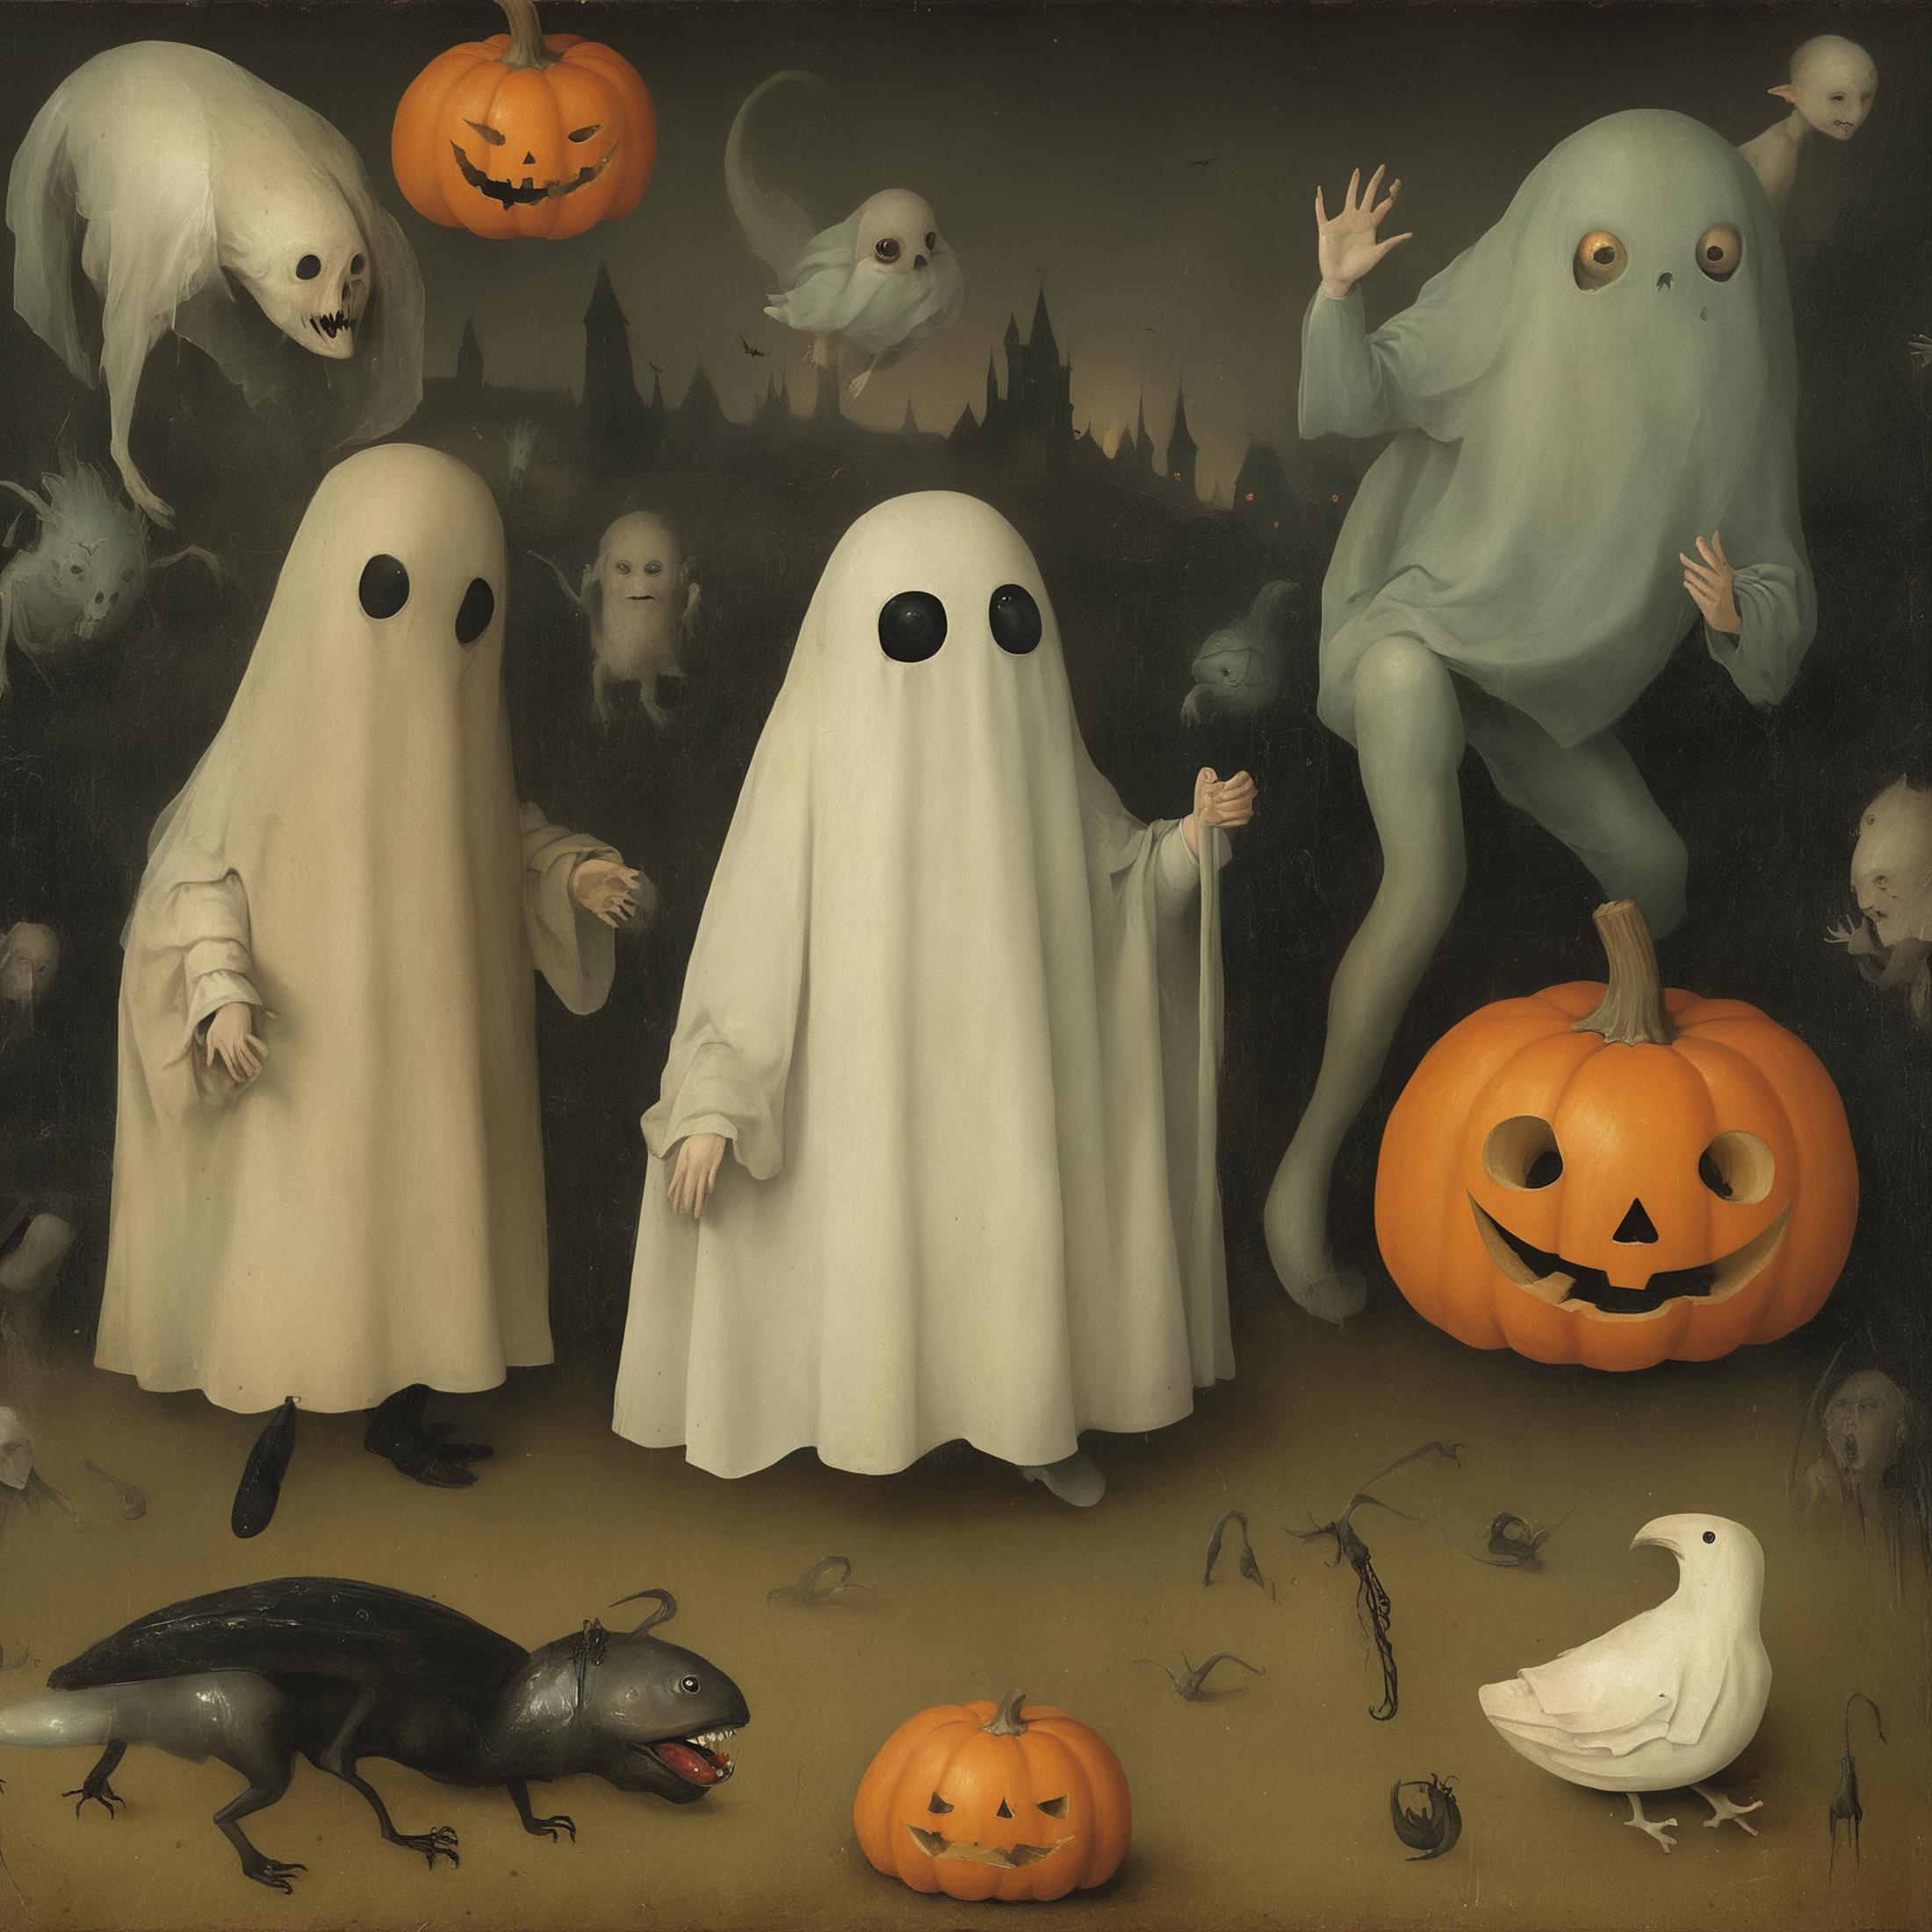 A Halloween-themed painting featuring ghosts, pumpkins, and other spooky elements.